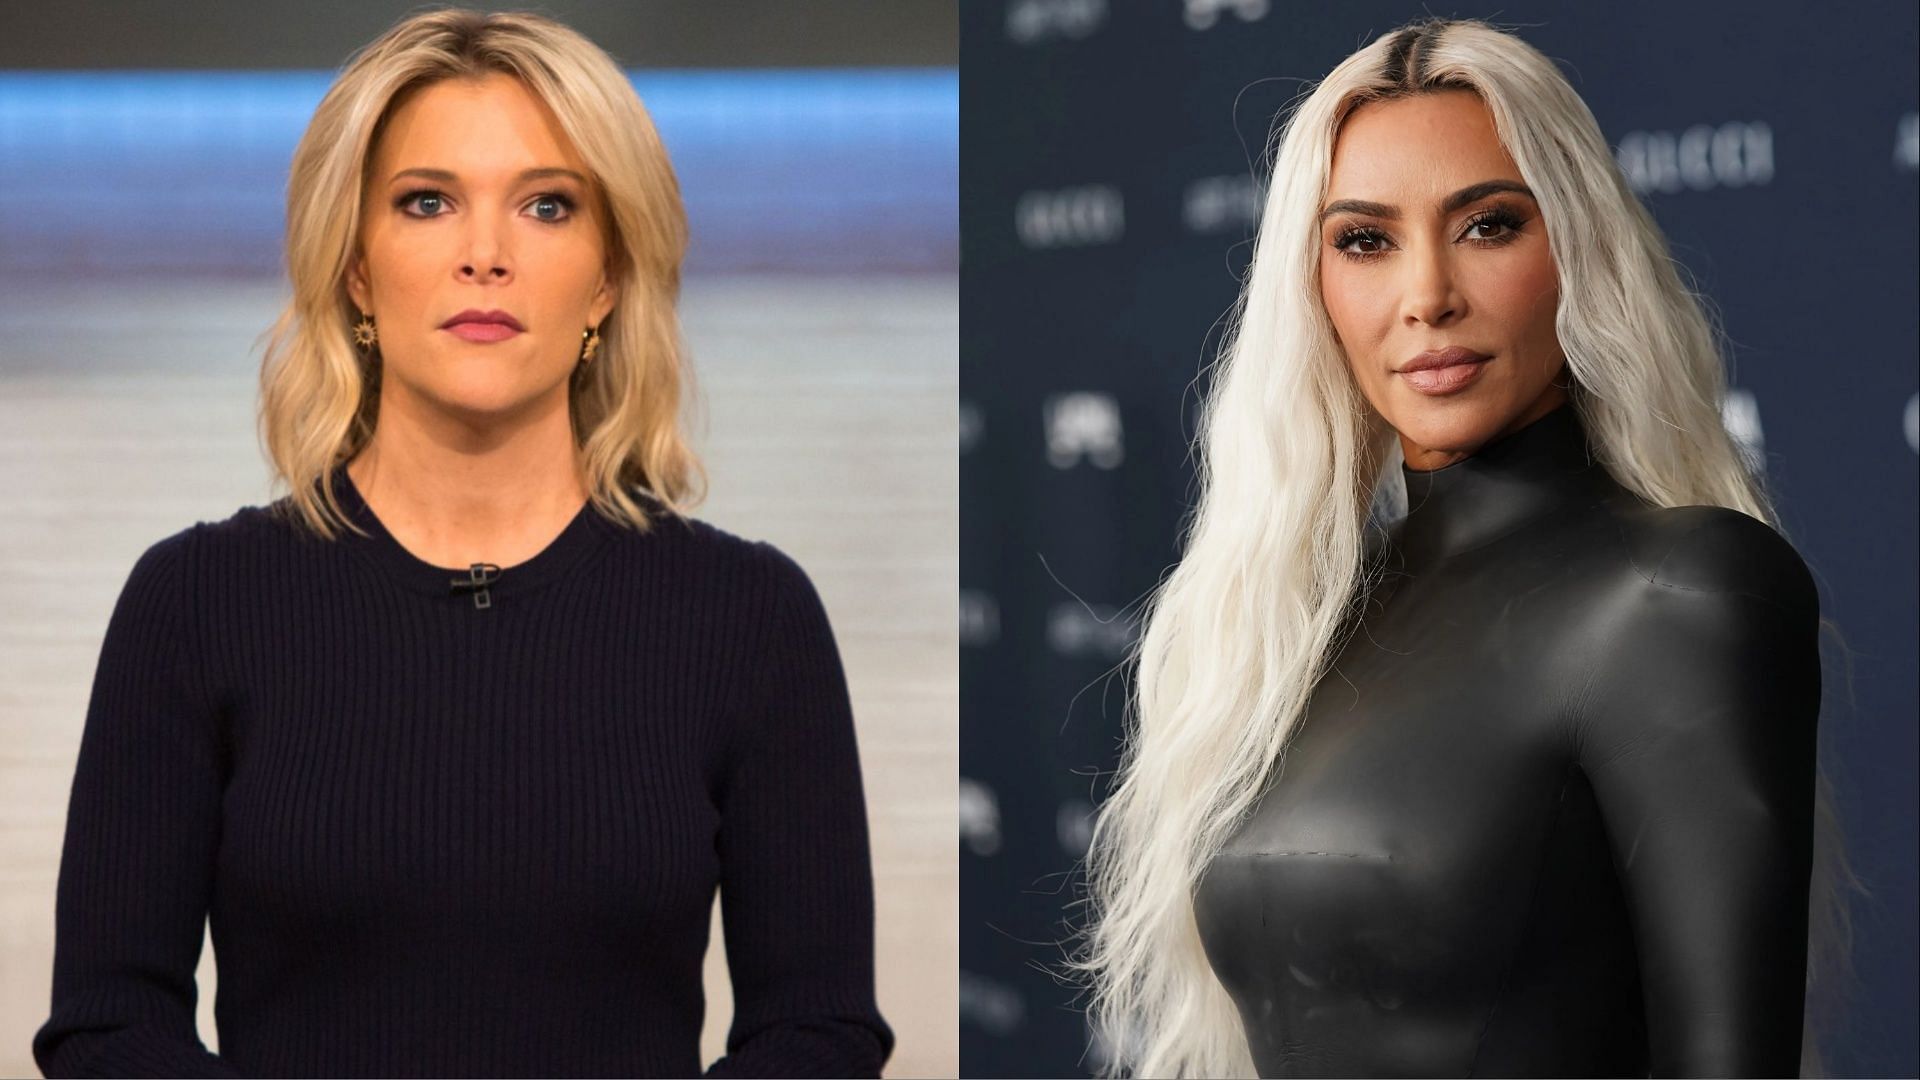 What Did Megyn Kelly Say About Kim Kardashian Journalist Rips Into Reality Star Over Her Vapid